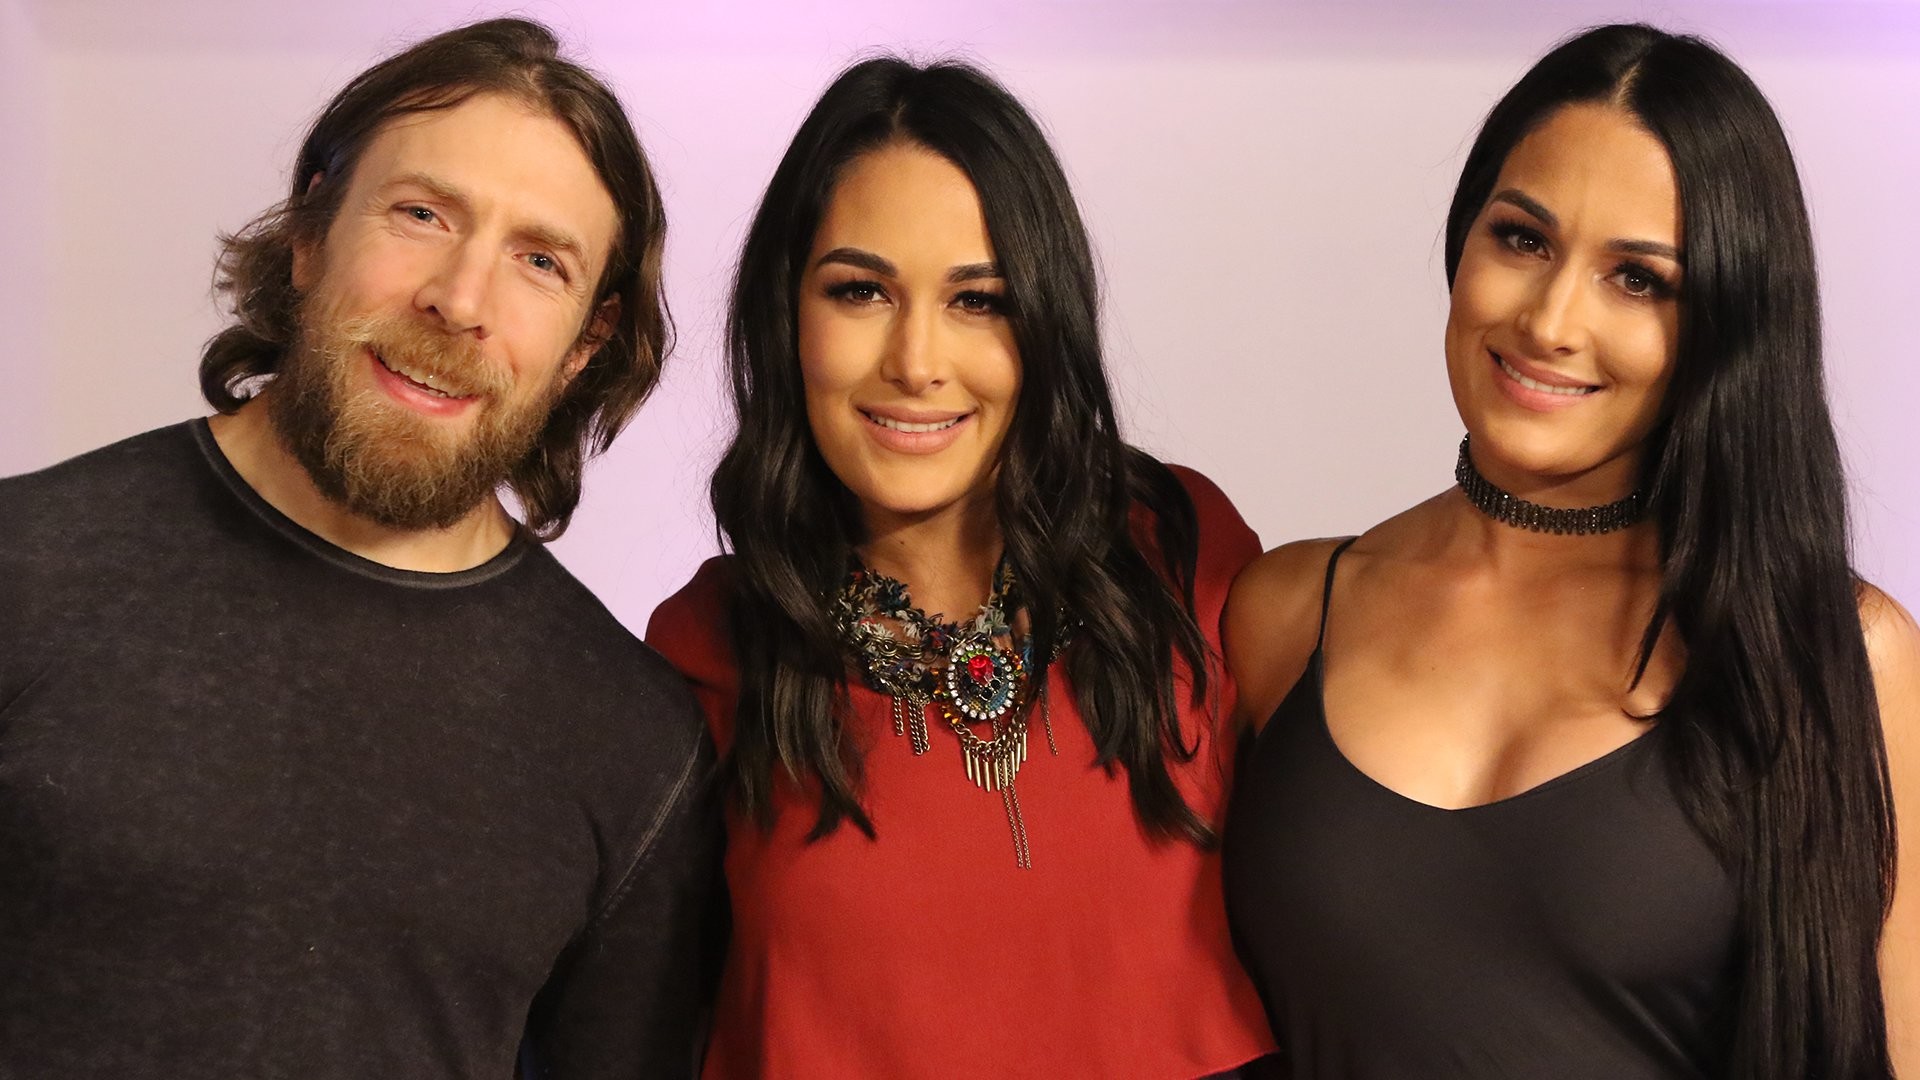 1920x1080 The Bella Twins and Daniel Bryan to appear on “You Kiddin' Me?!”